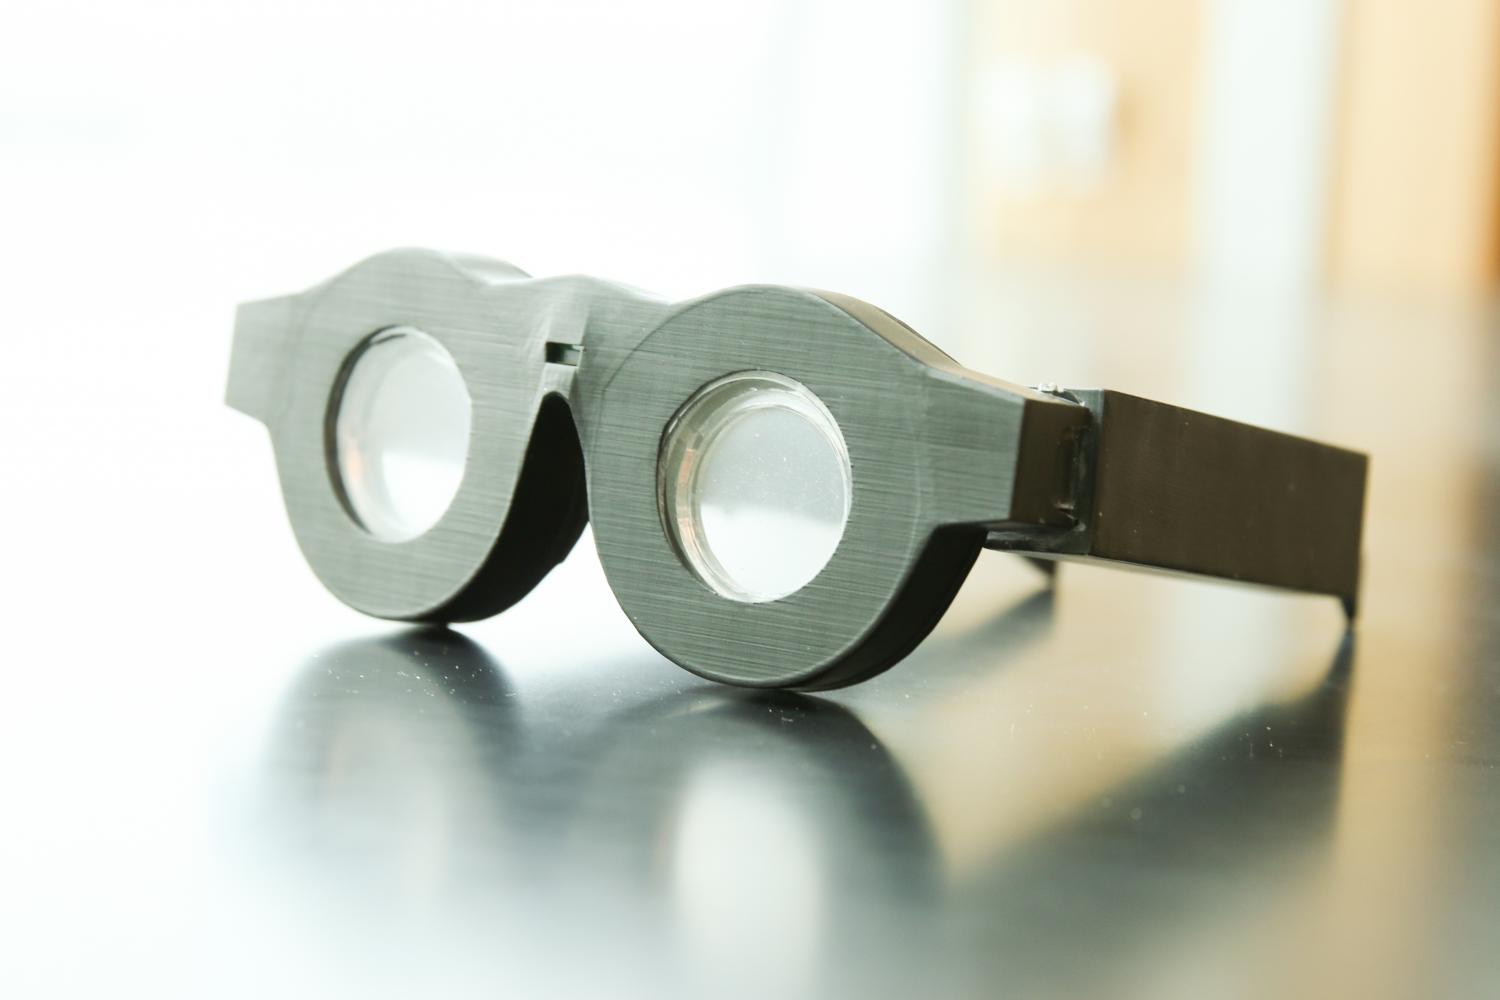 What are smart glasses and how do they work?